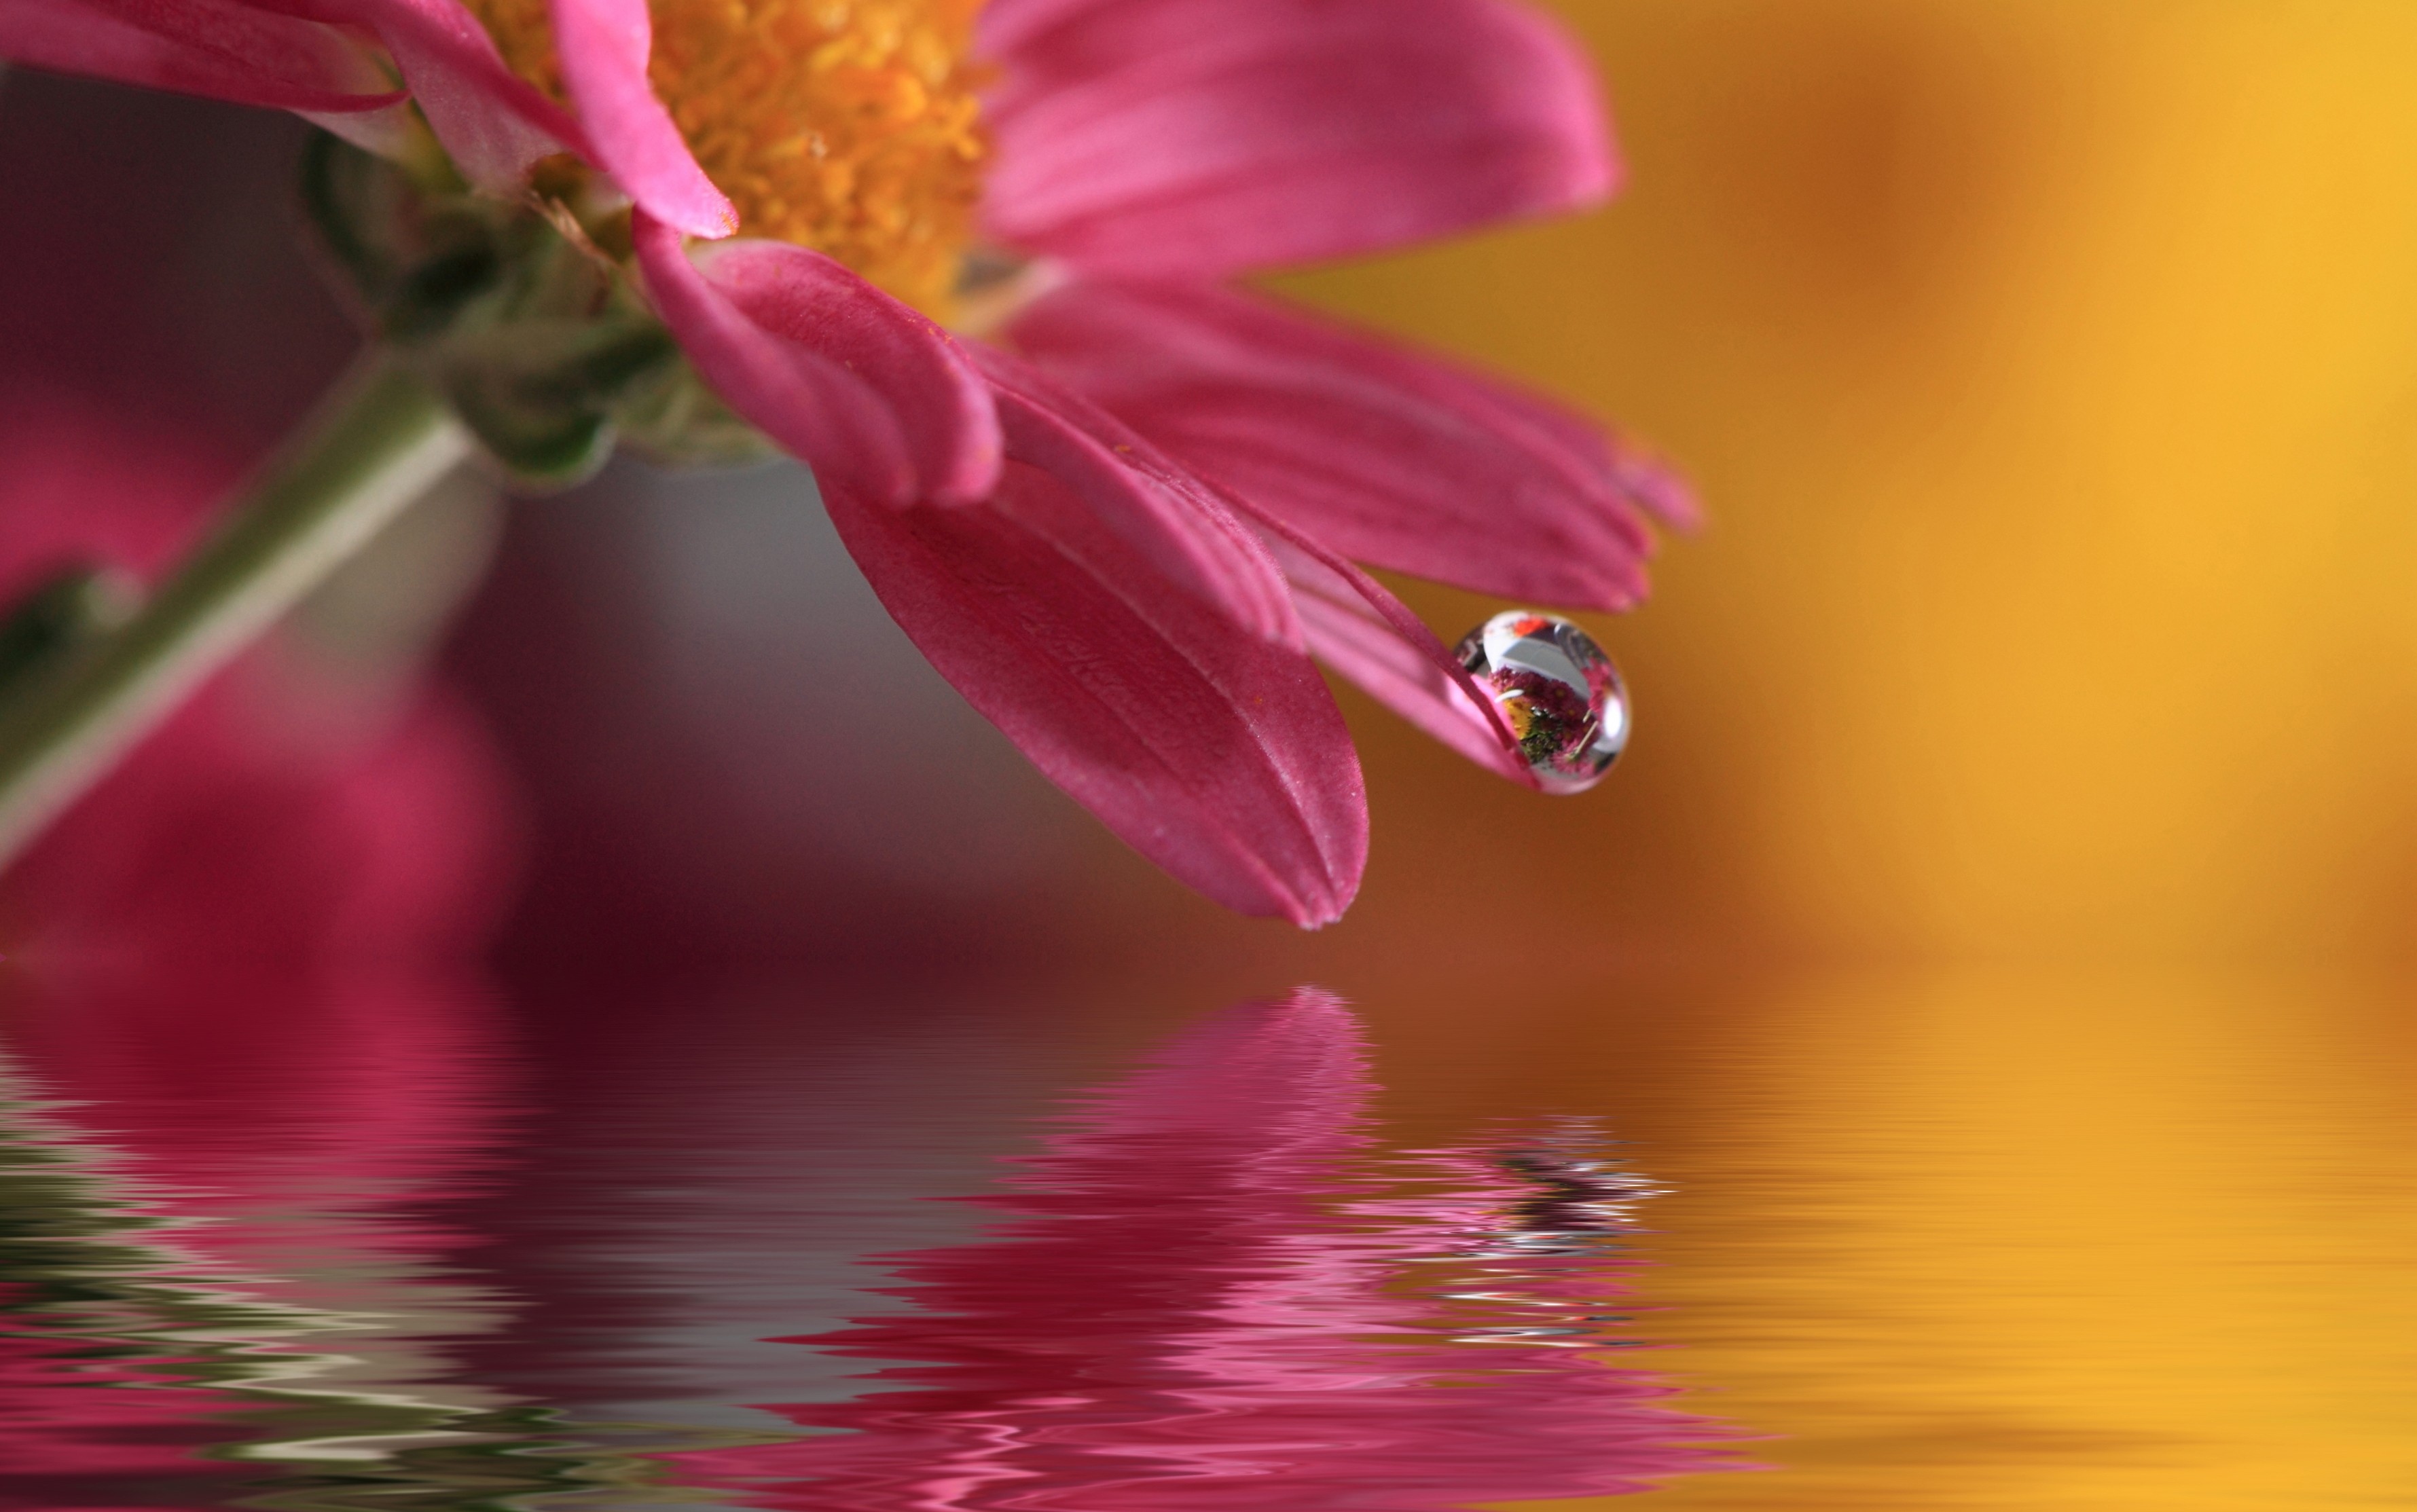 Macro Blurred Water Water Drops Flowers Lights Photography